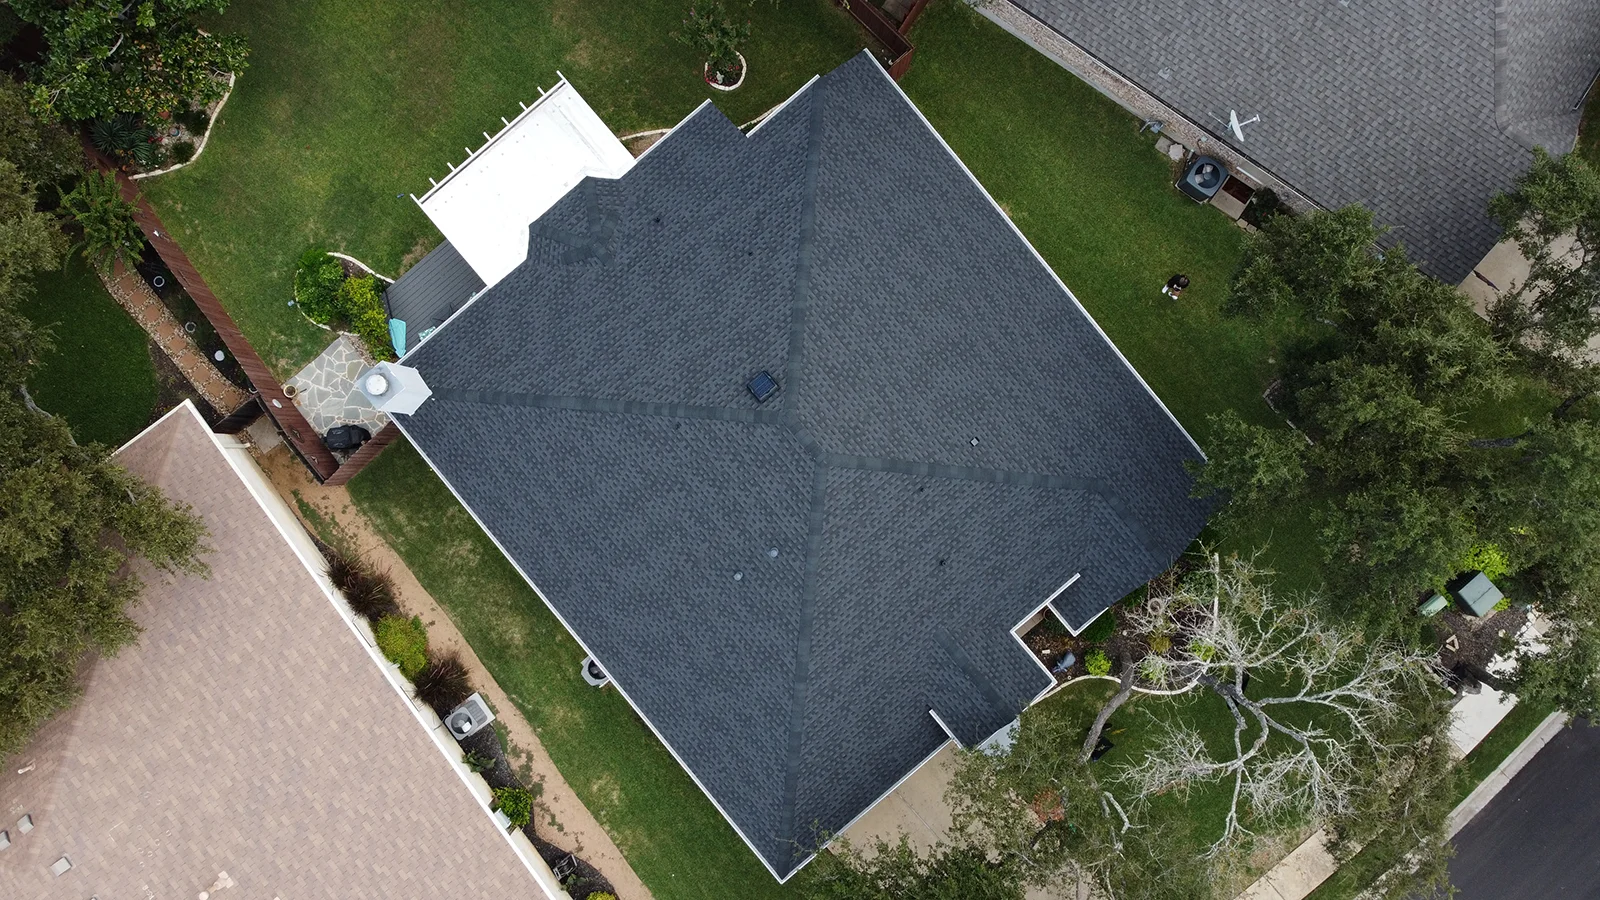 Burnet Roofing by Roam Roof and Solar specializing in both installation and repairs